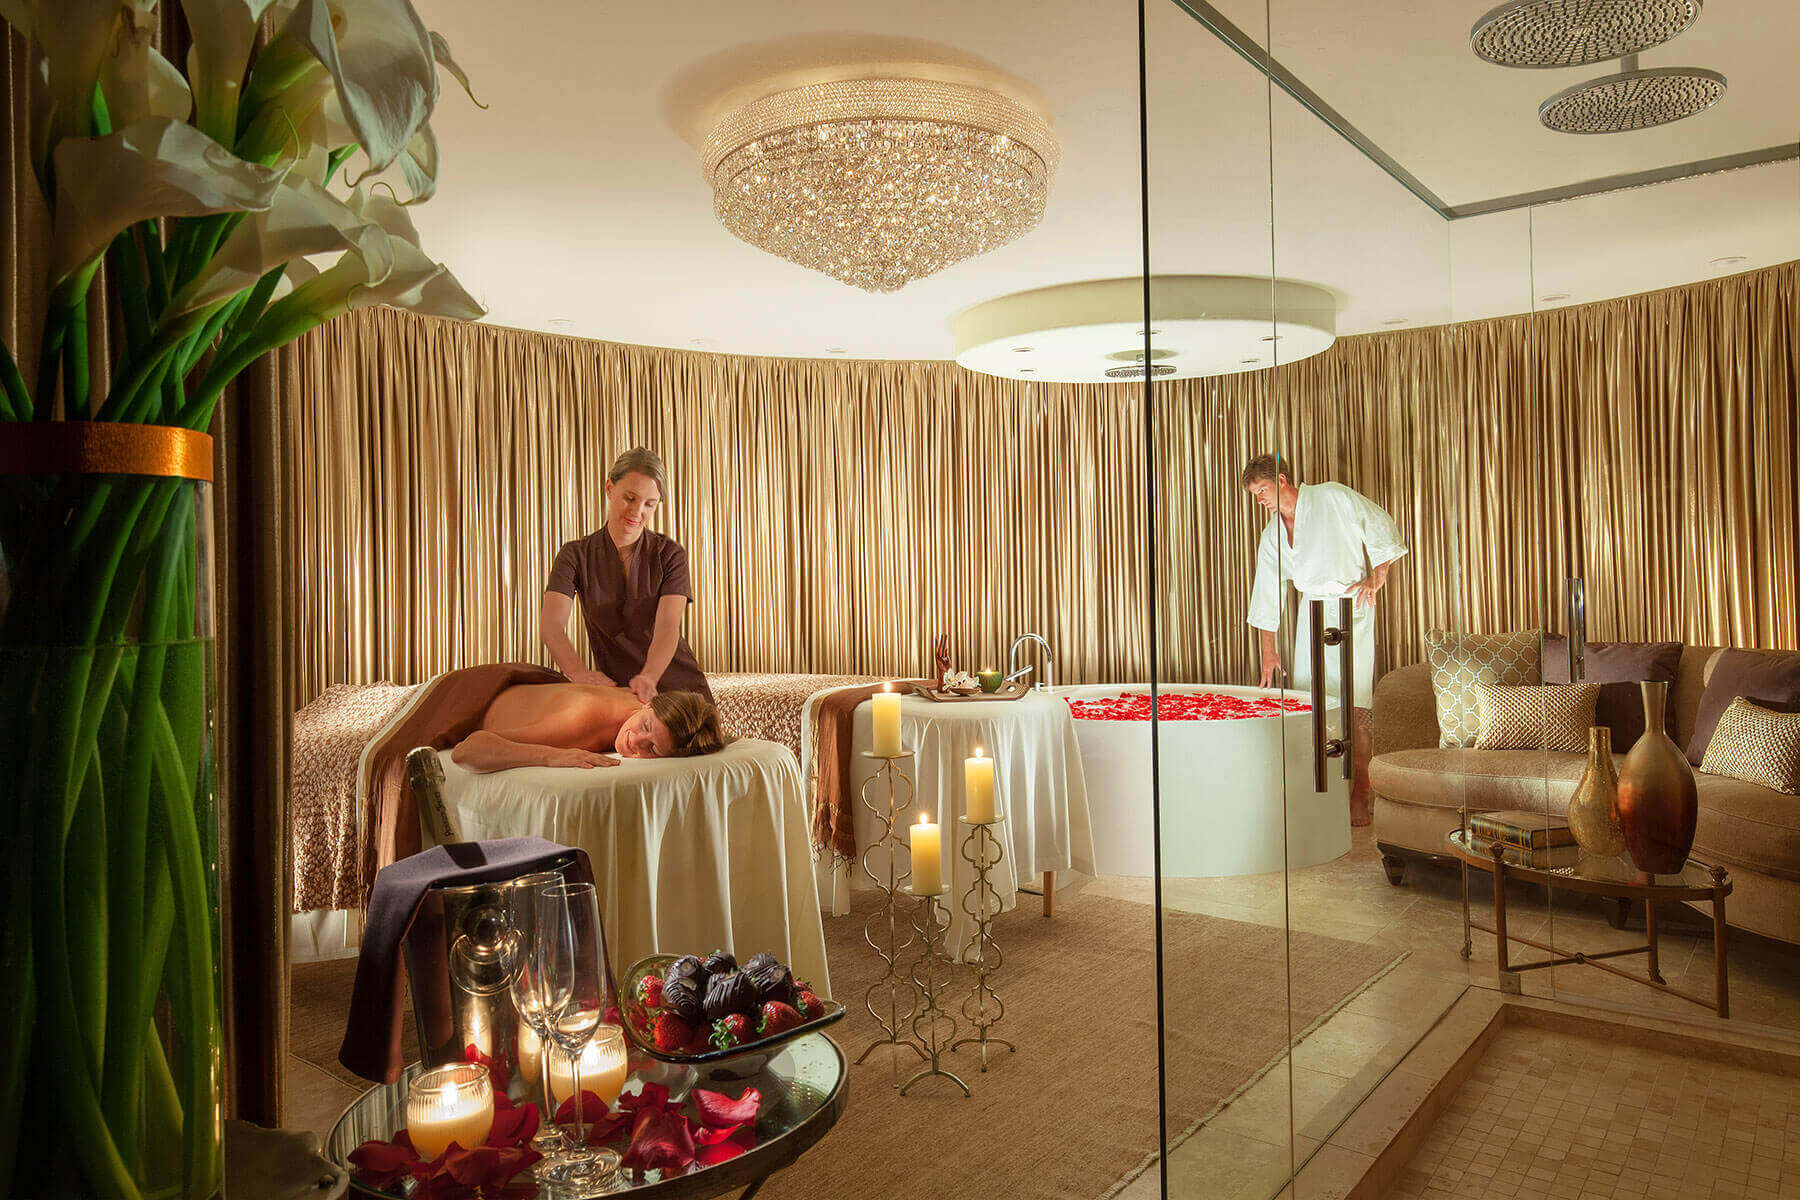 spa room with female getting massage and male filling bath tub